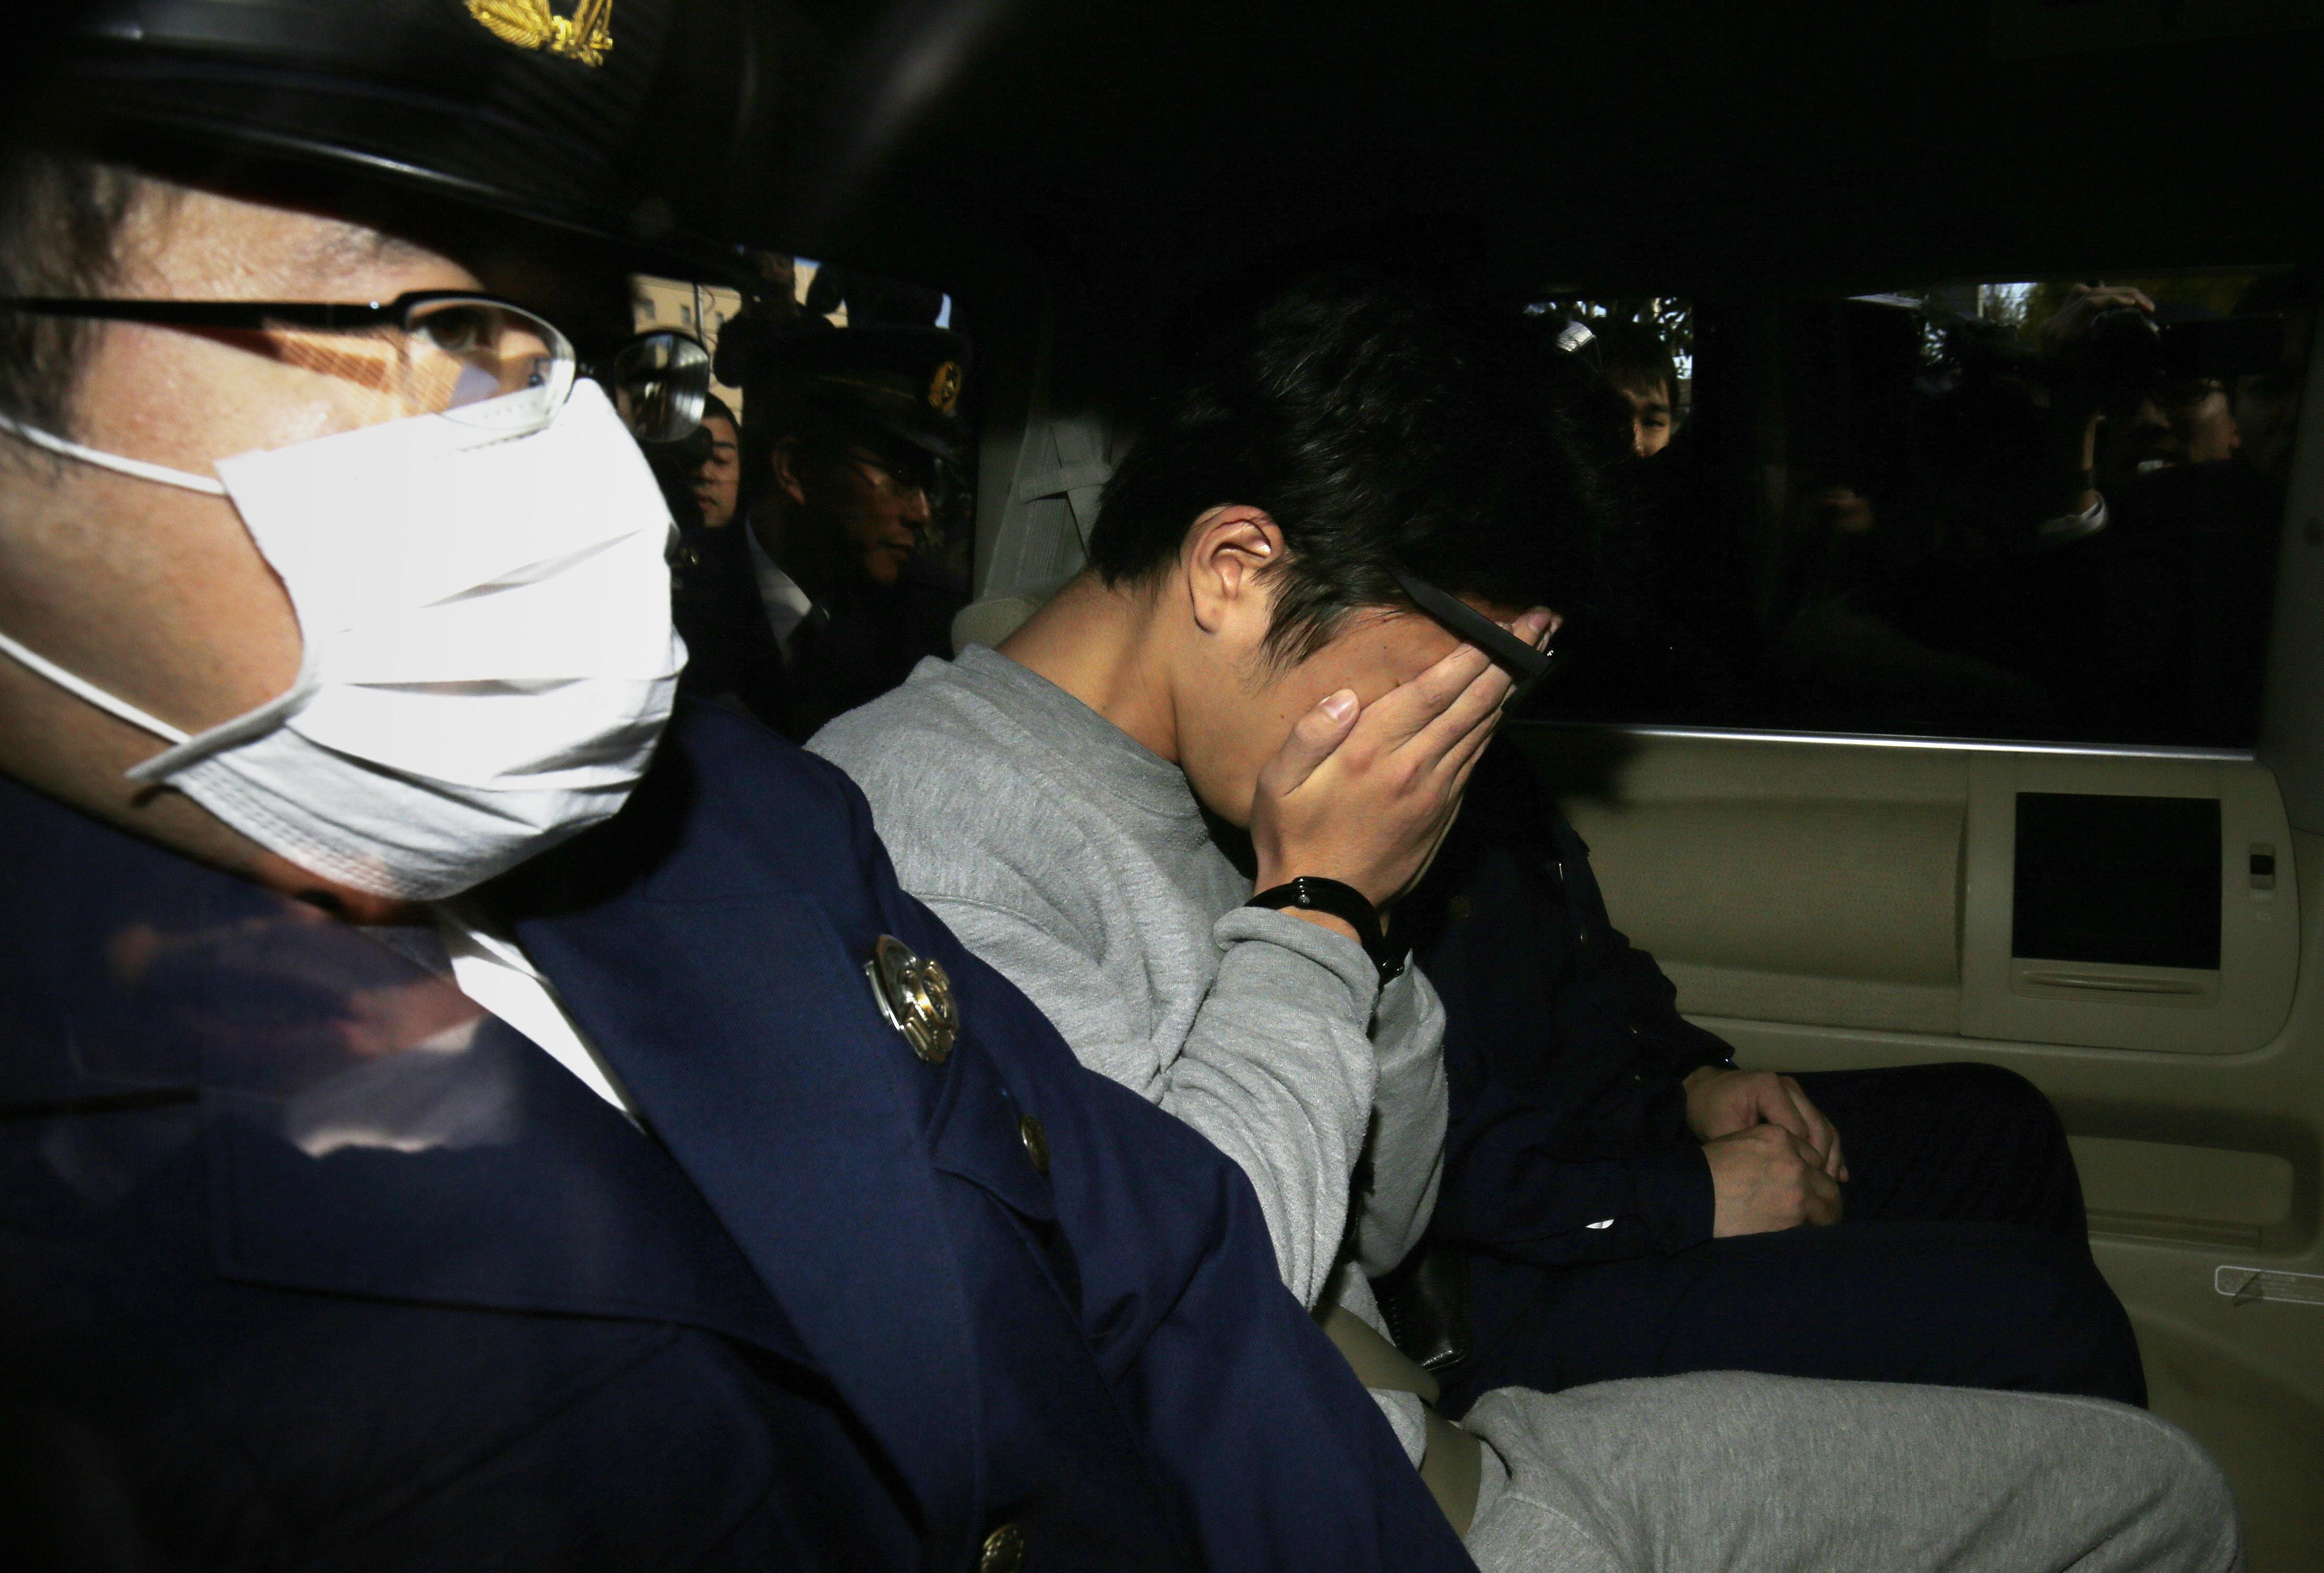 The accused was arrested after dismembered bodies were found in his Tokyo apartment